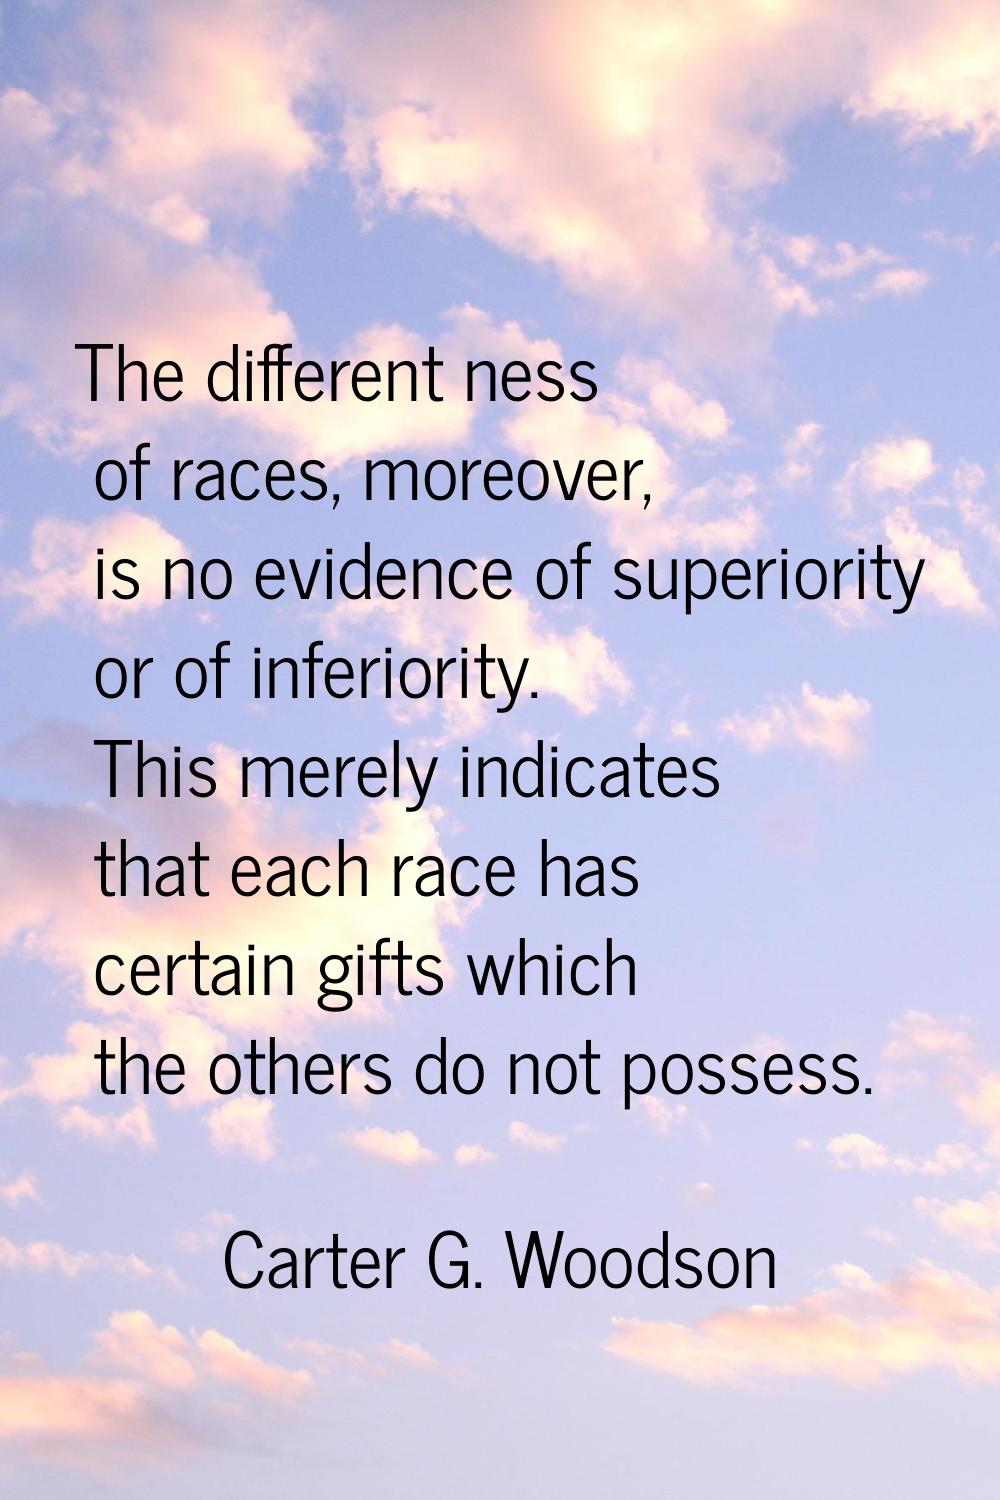 The different ness of races, moreover, is no evidence of superiority or of inferiority. This merely